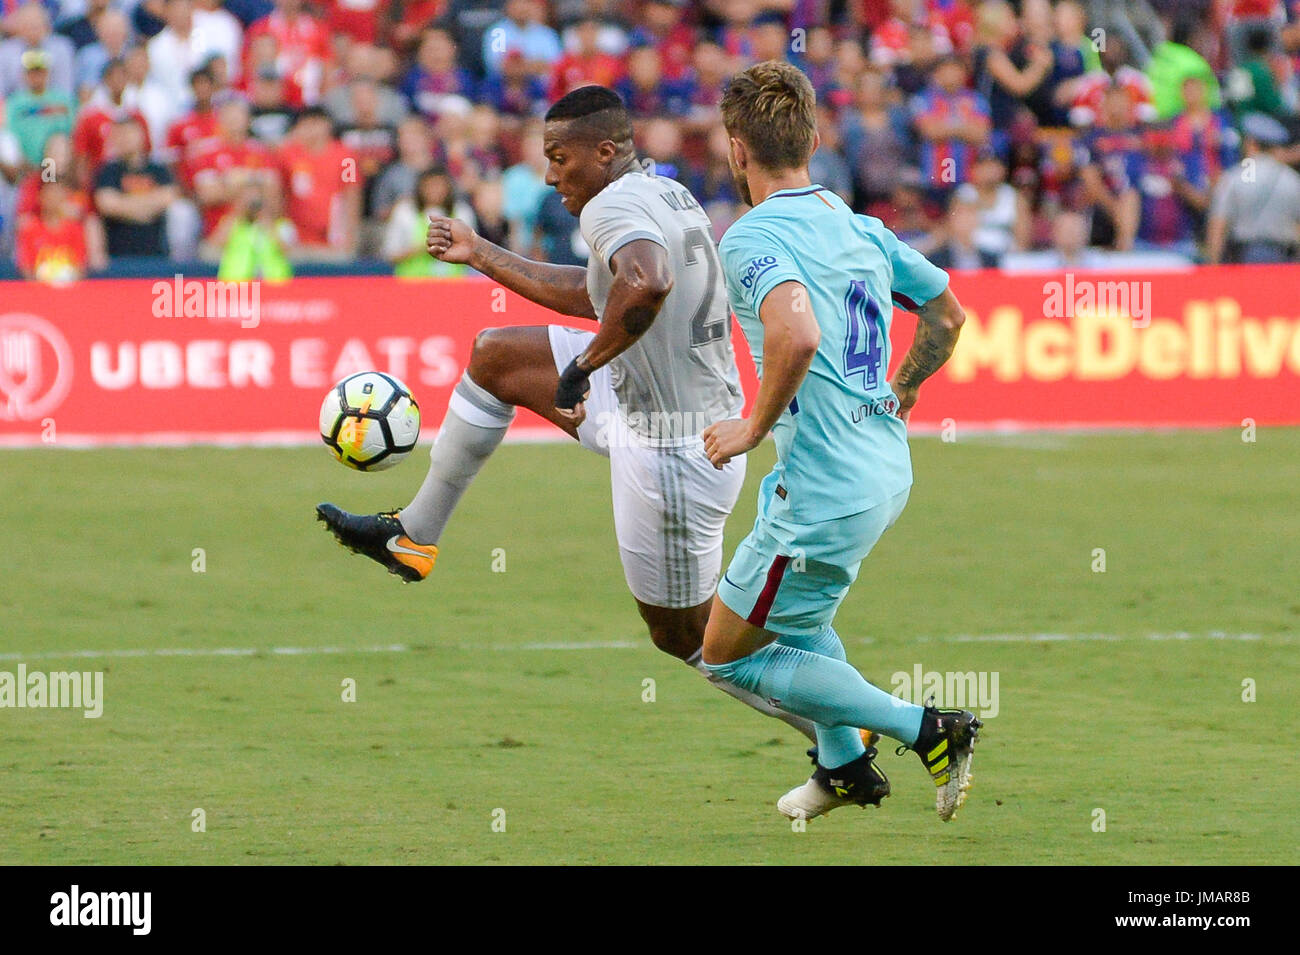 Landover, Maryland, USA. 26th July, 2017. Manchester United's ANTONIO VALENCIA (25) kicks the ball away from Barcelona Midfielder IVAN RAKITIC (4) during the first half of the game held at FEDEXFIELD in Landover, Maryland. Credit: Amy Sanderson/ZUMA Wire/Alamy Live News Stock Photo